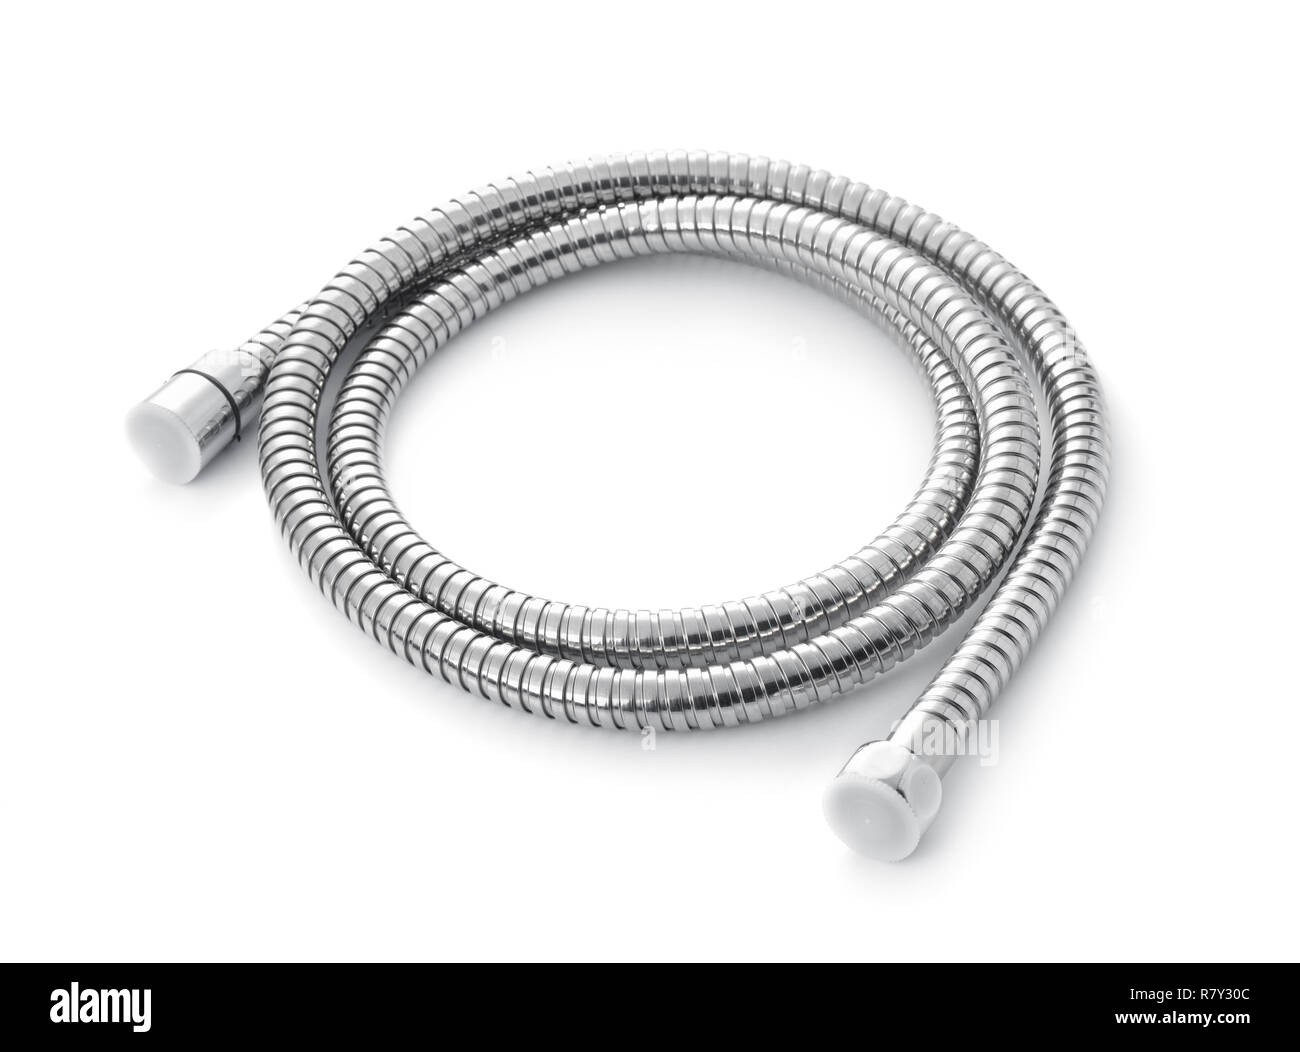 Stainless steel water shower flexible hose isolated on white Stock Photo